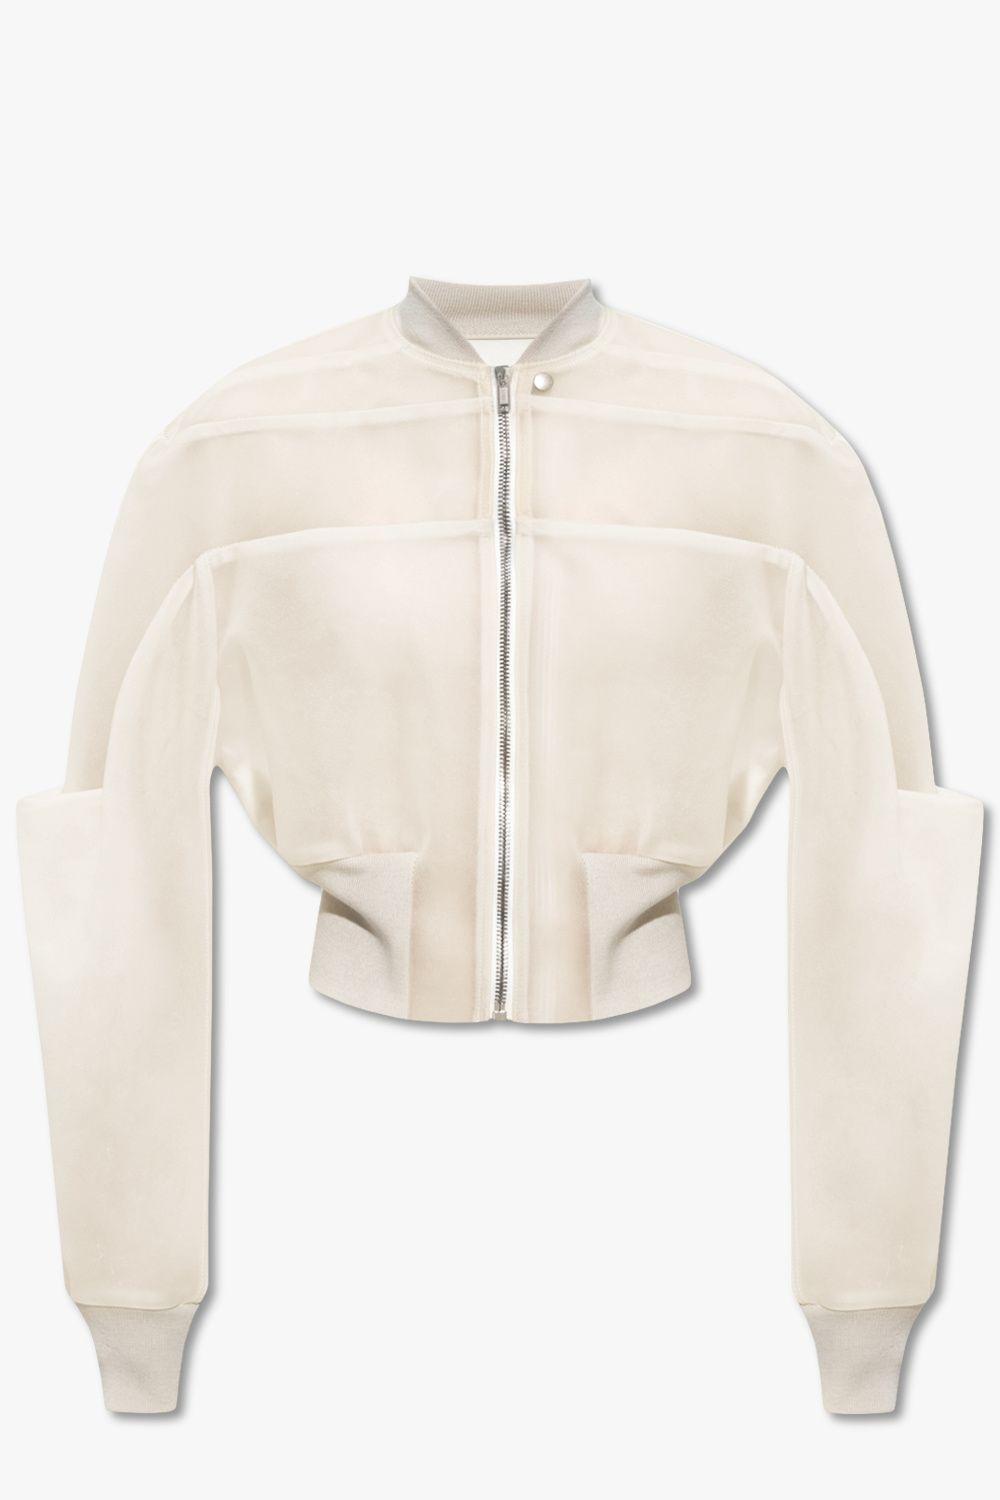 Rick Owens Leather Bomber Jacket in White for Men | Lyst